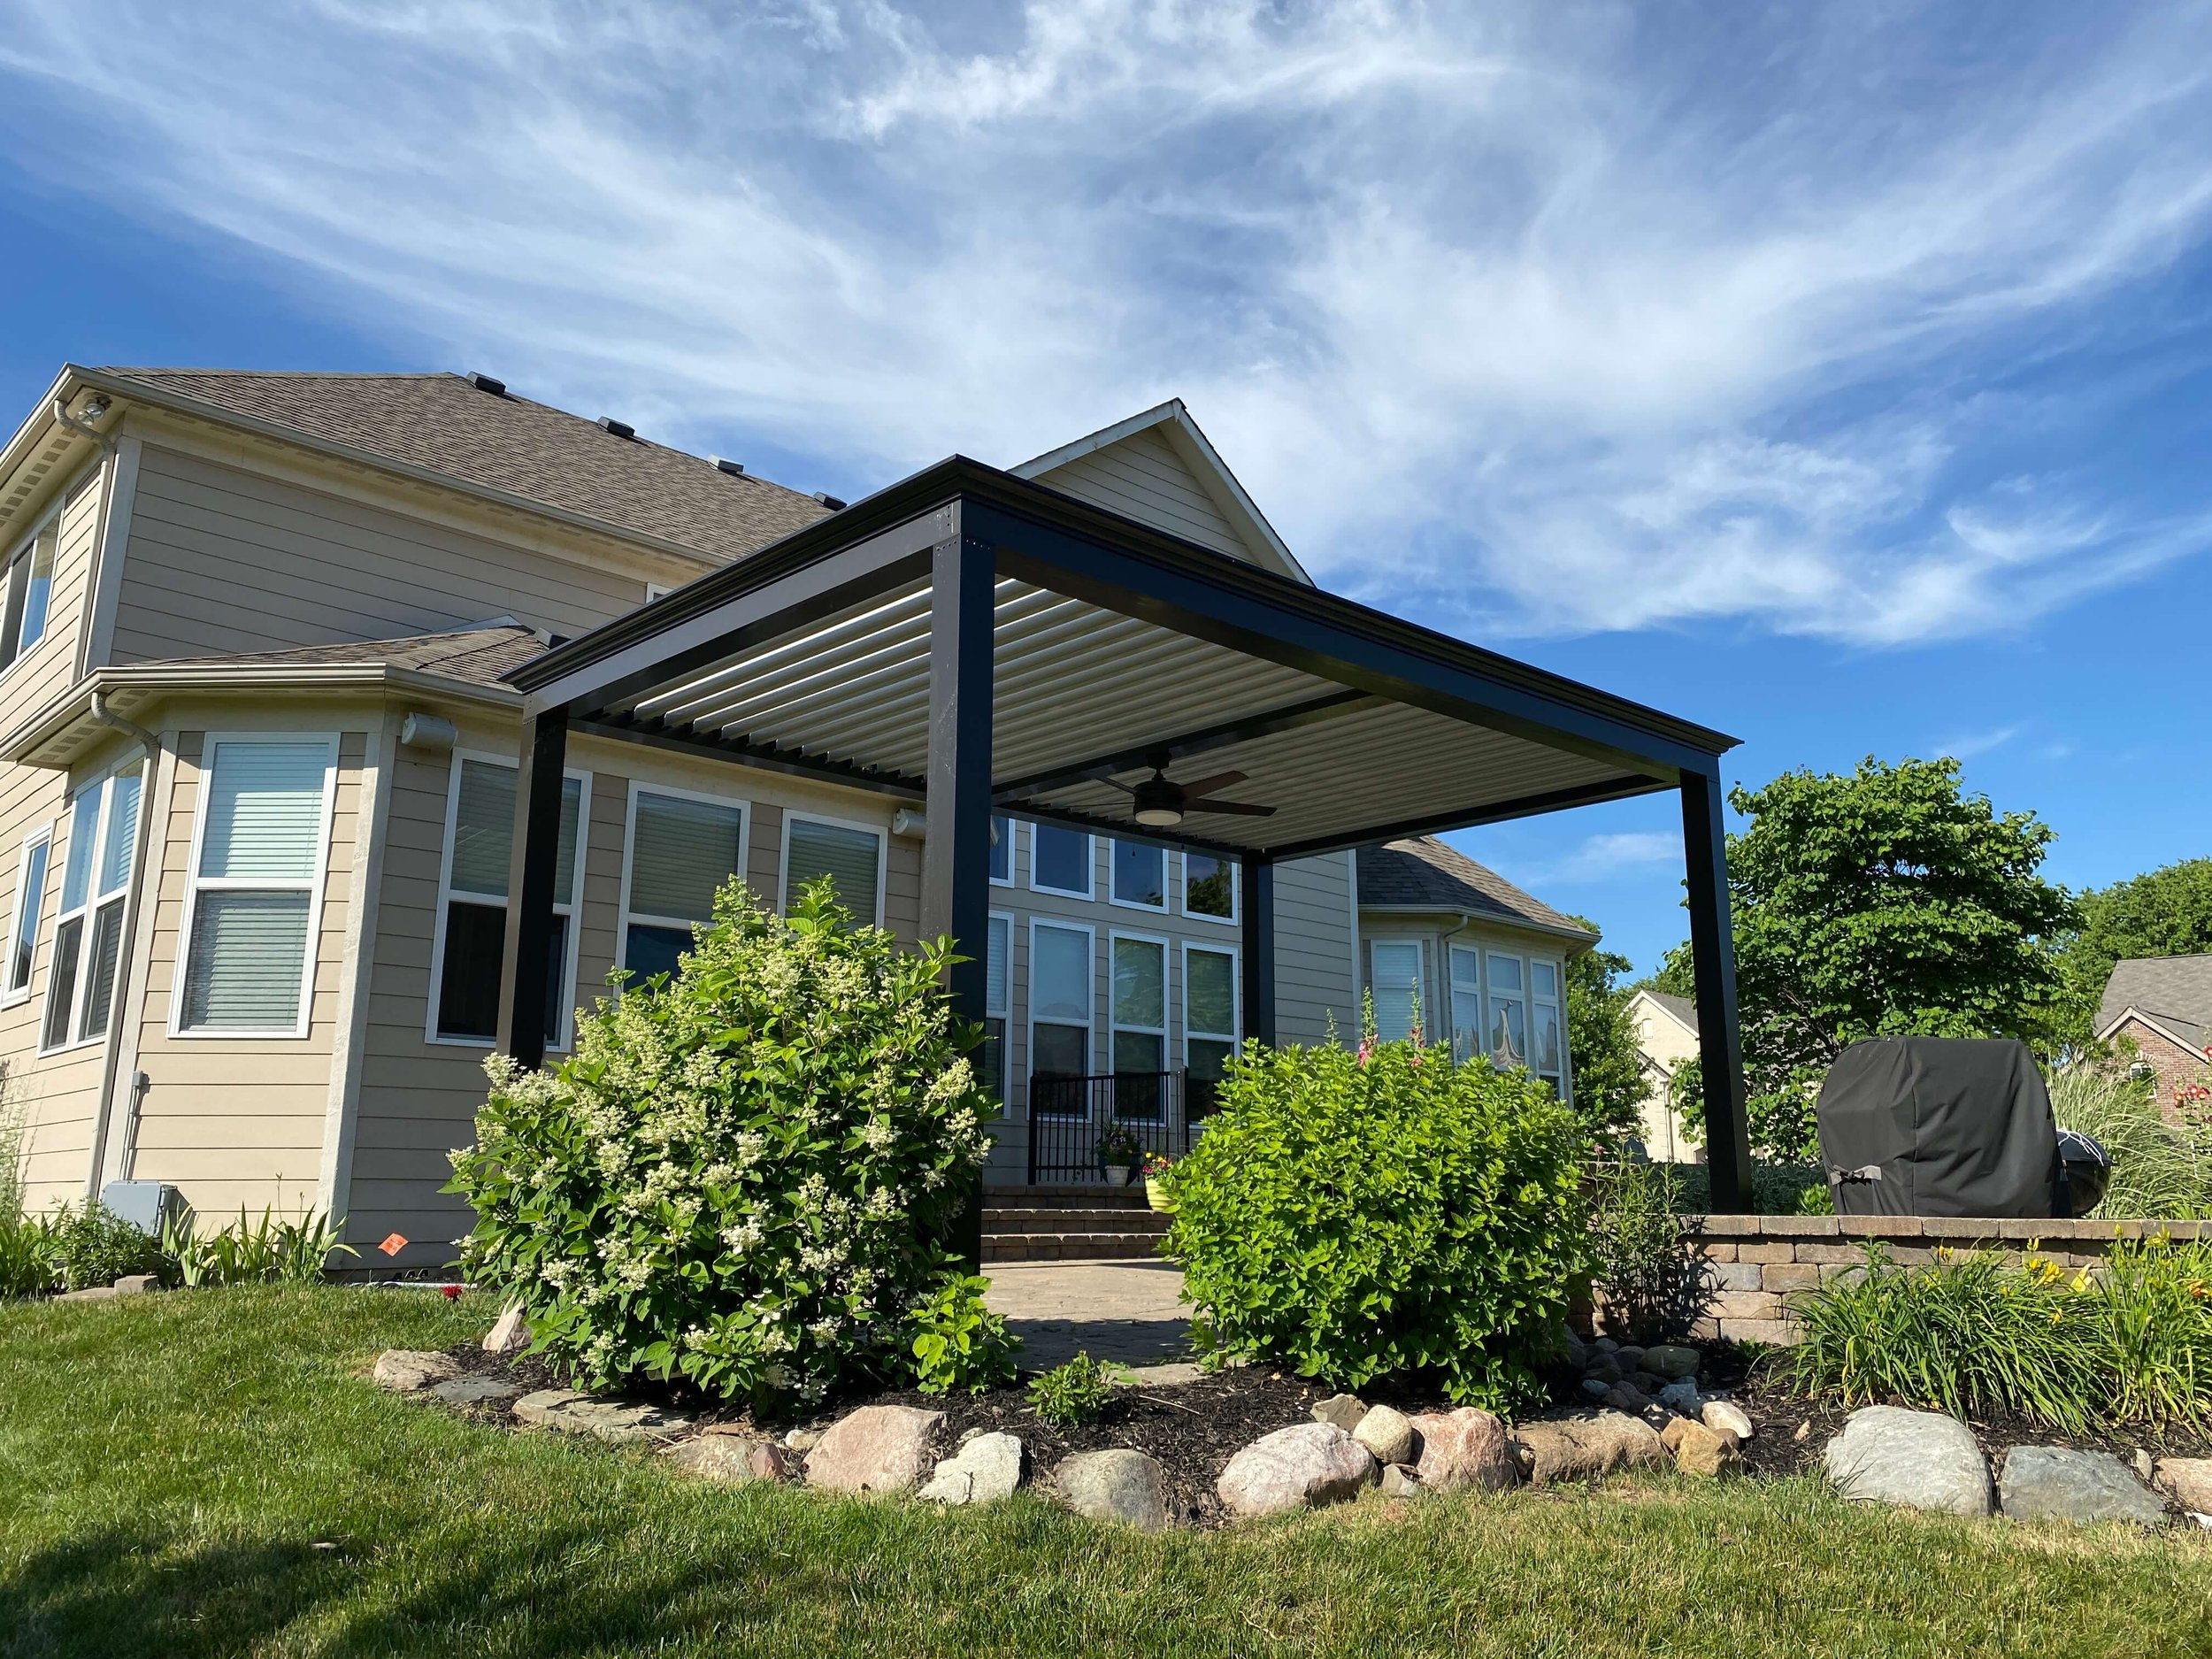 Aluminum pergola frame with louvered roof on patio to enhance outdoor space